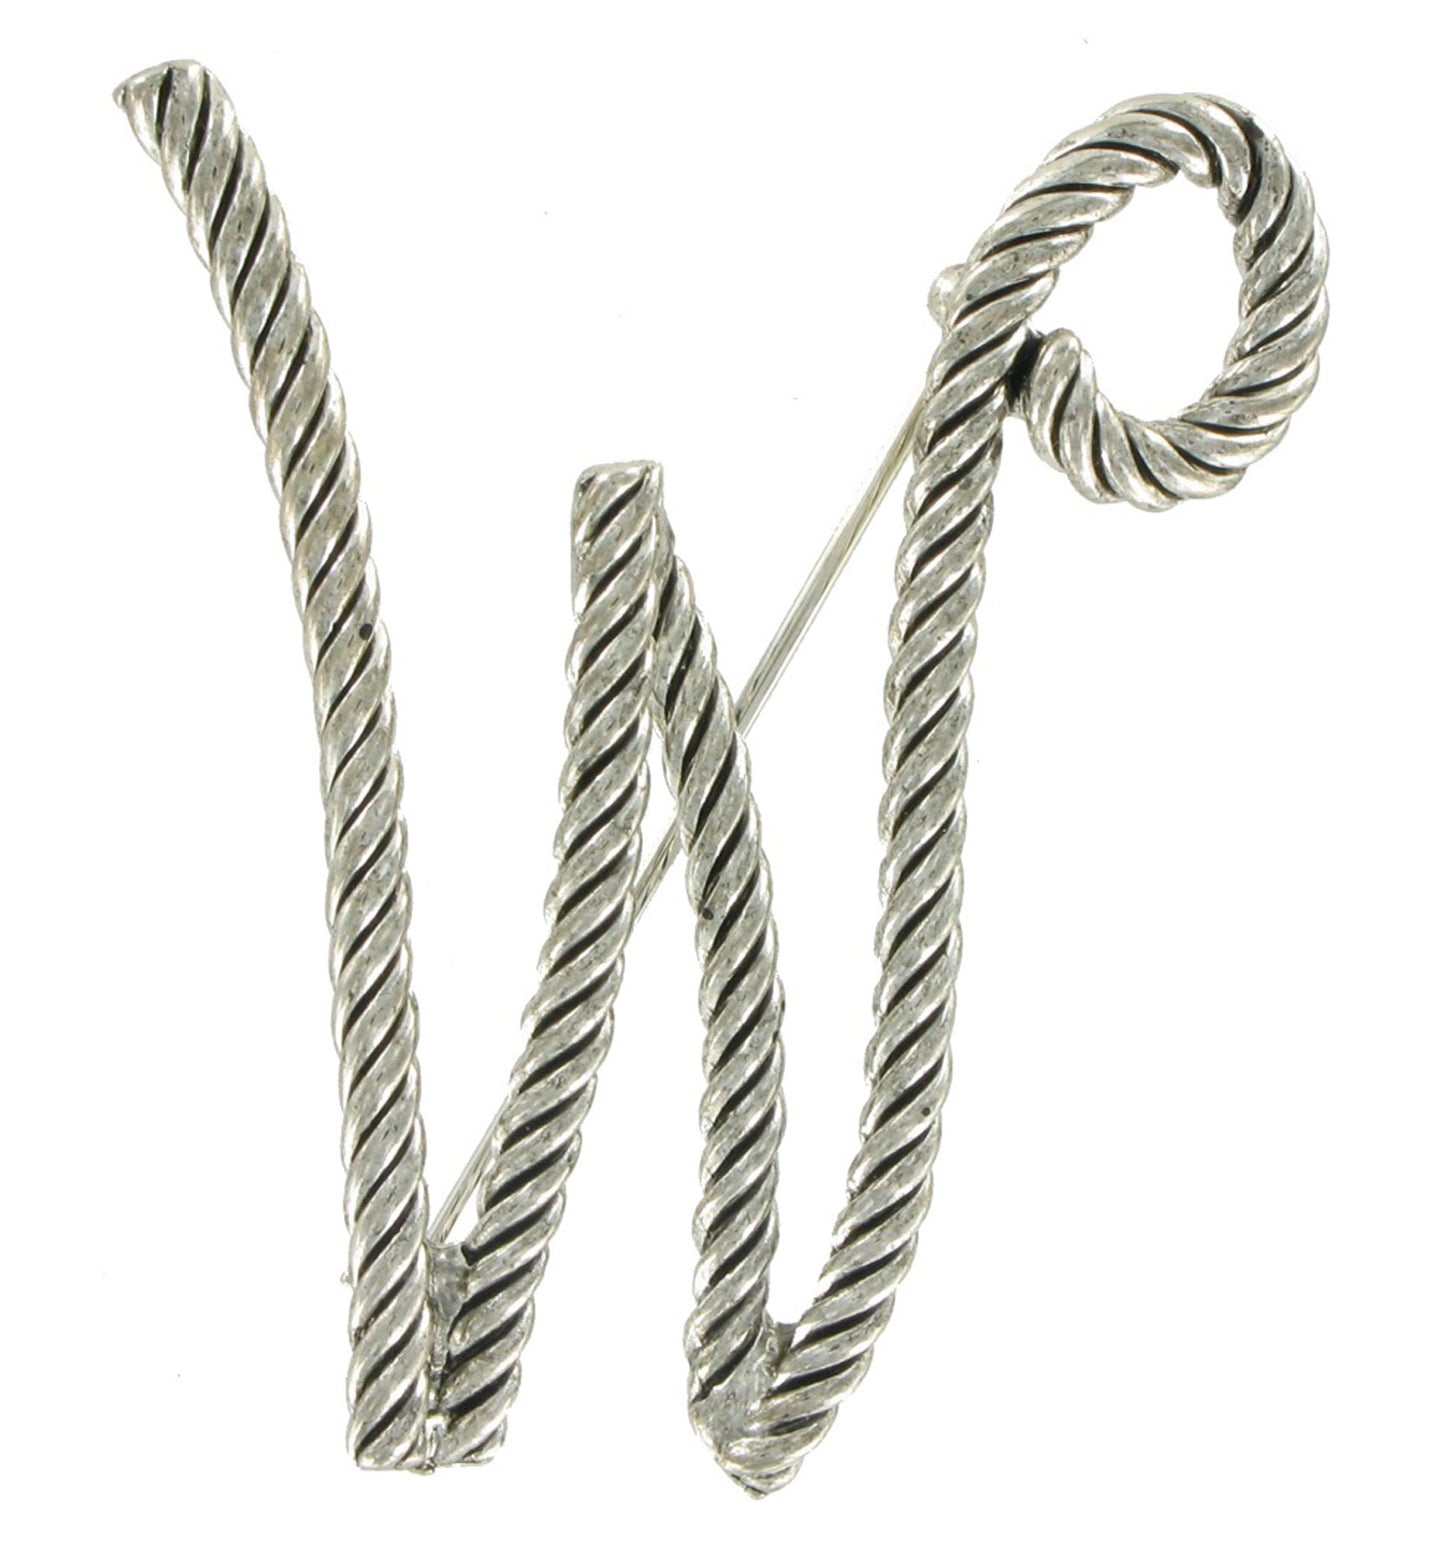 Large Script Silver Tone Rope Initial "W" Pin Brooch 2 1/2"